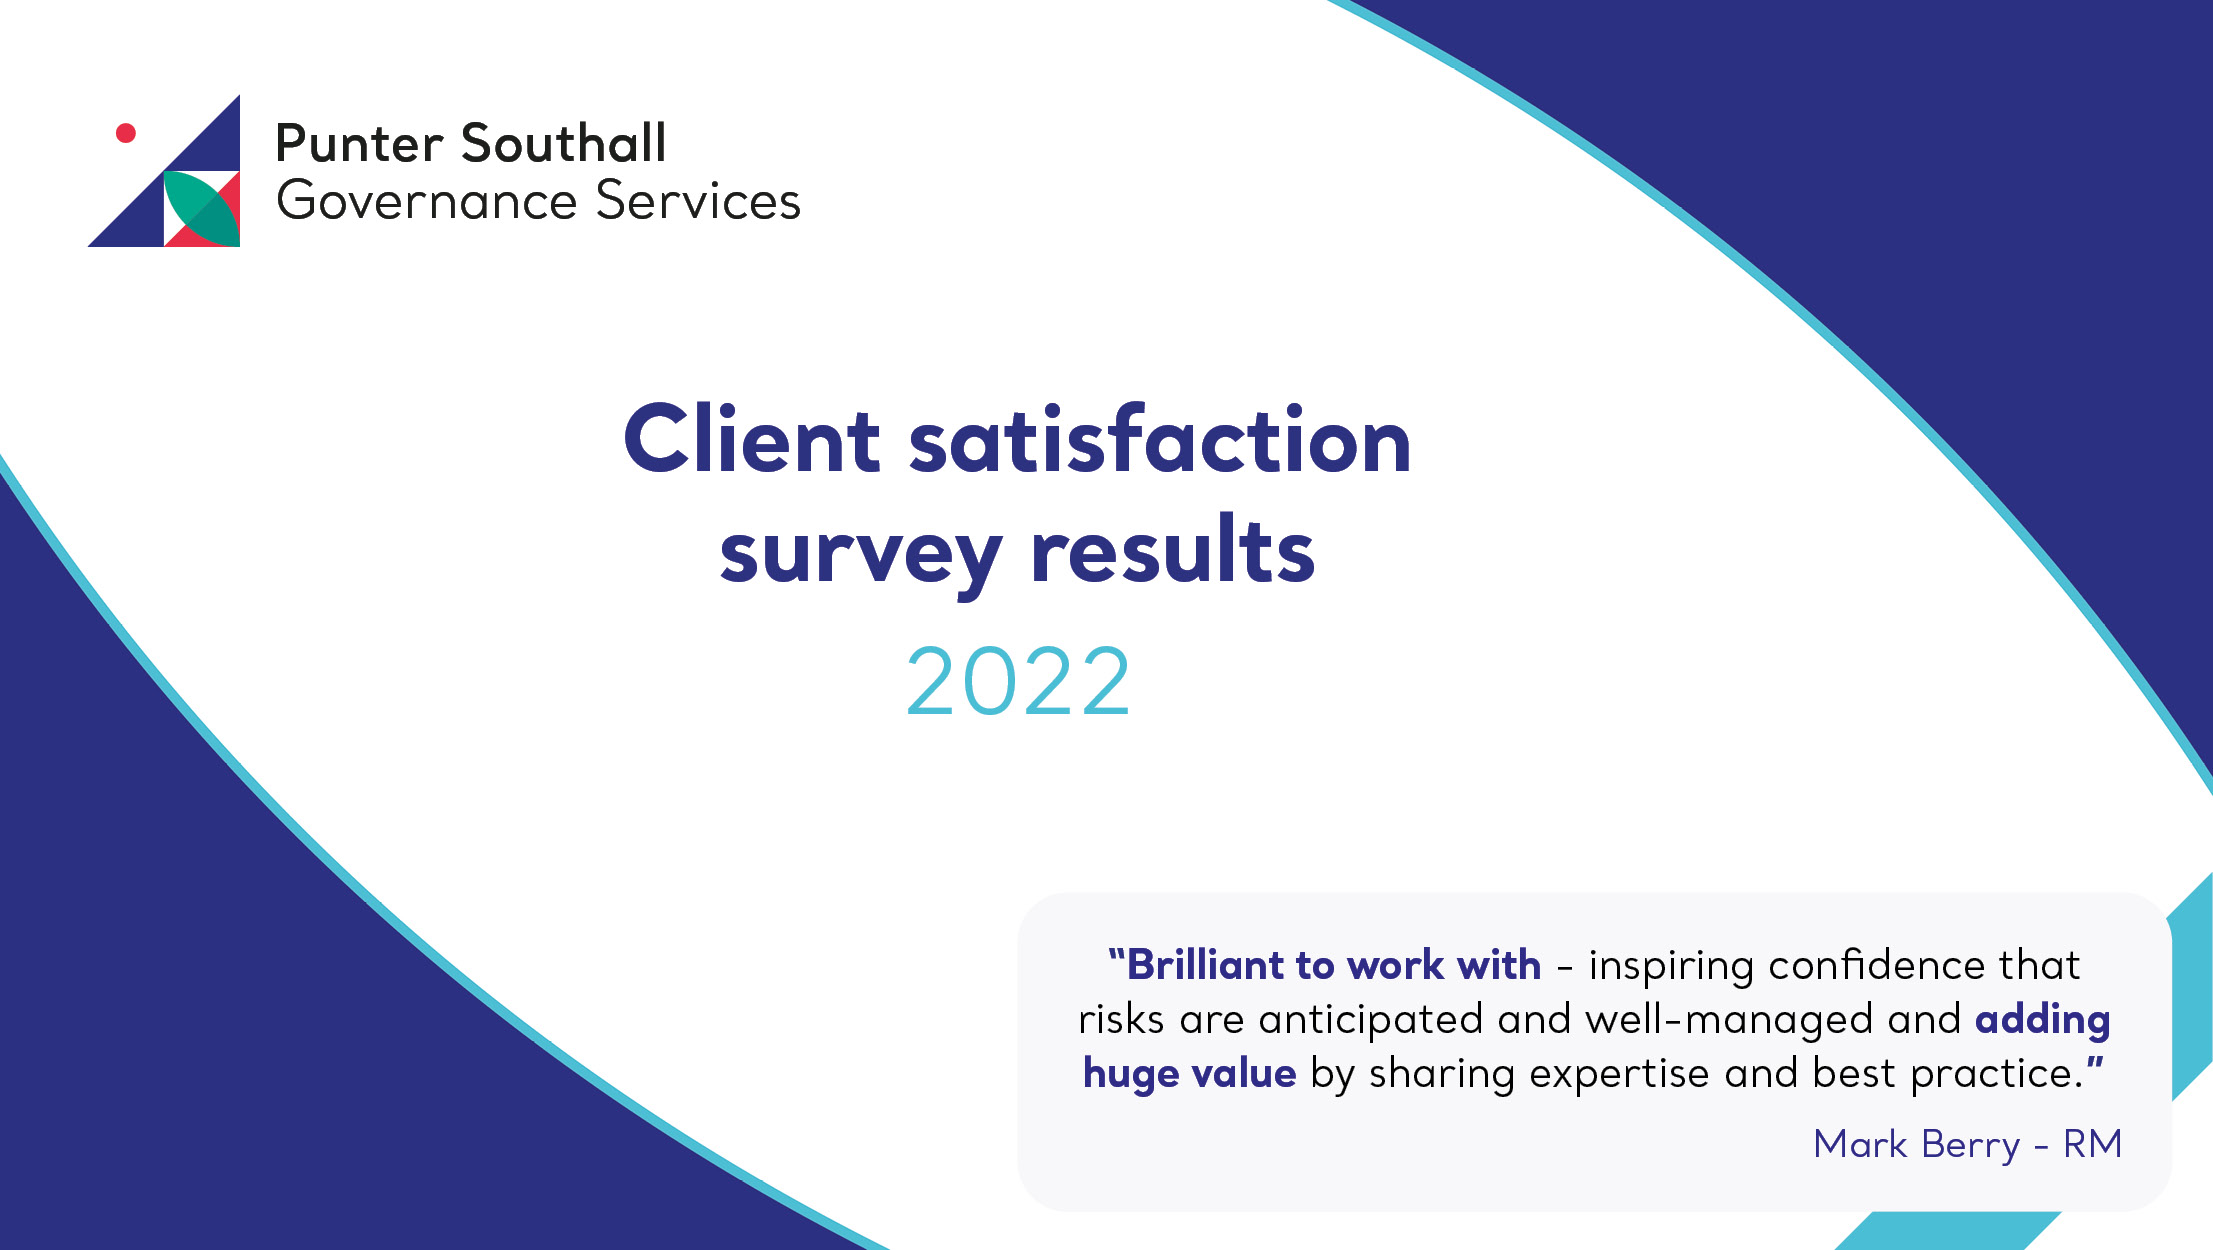 Image for opinion “Client satisfaction survey results 2022”